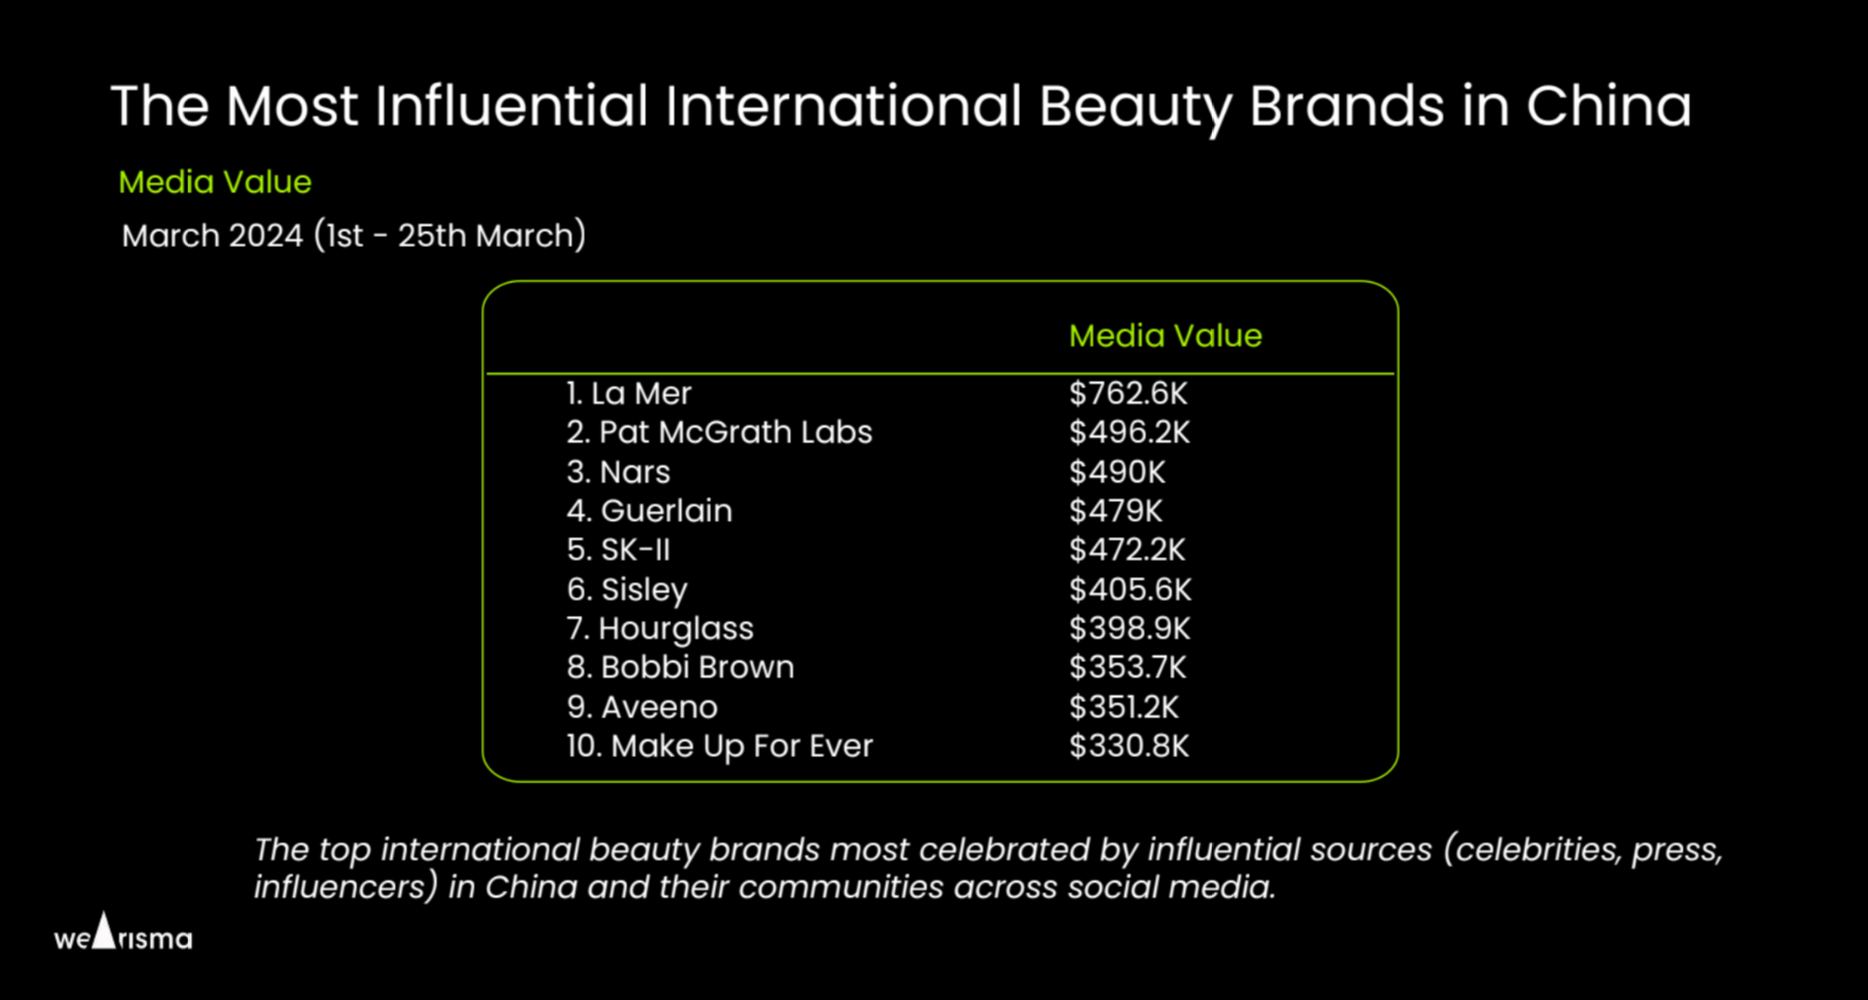 The top international beauty brands most celebrated in China and their communities across social media. Image: WeArisma